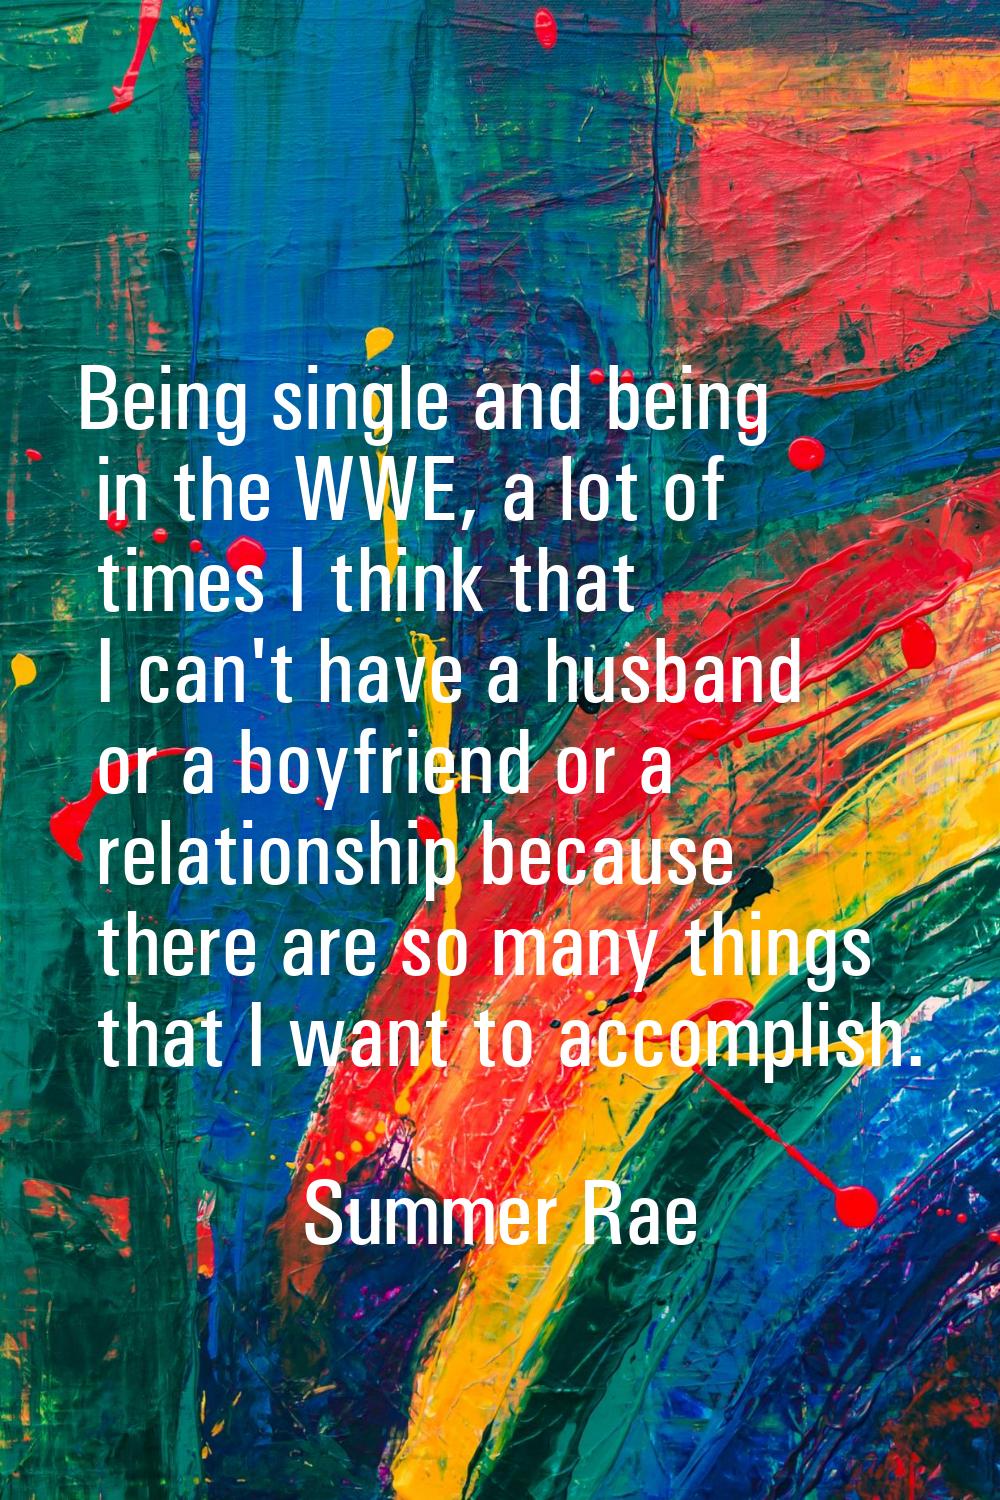 Being single and being in the WWE, a lot of times I think that I can't have a husband or a boyfrien